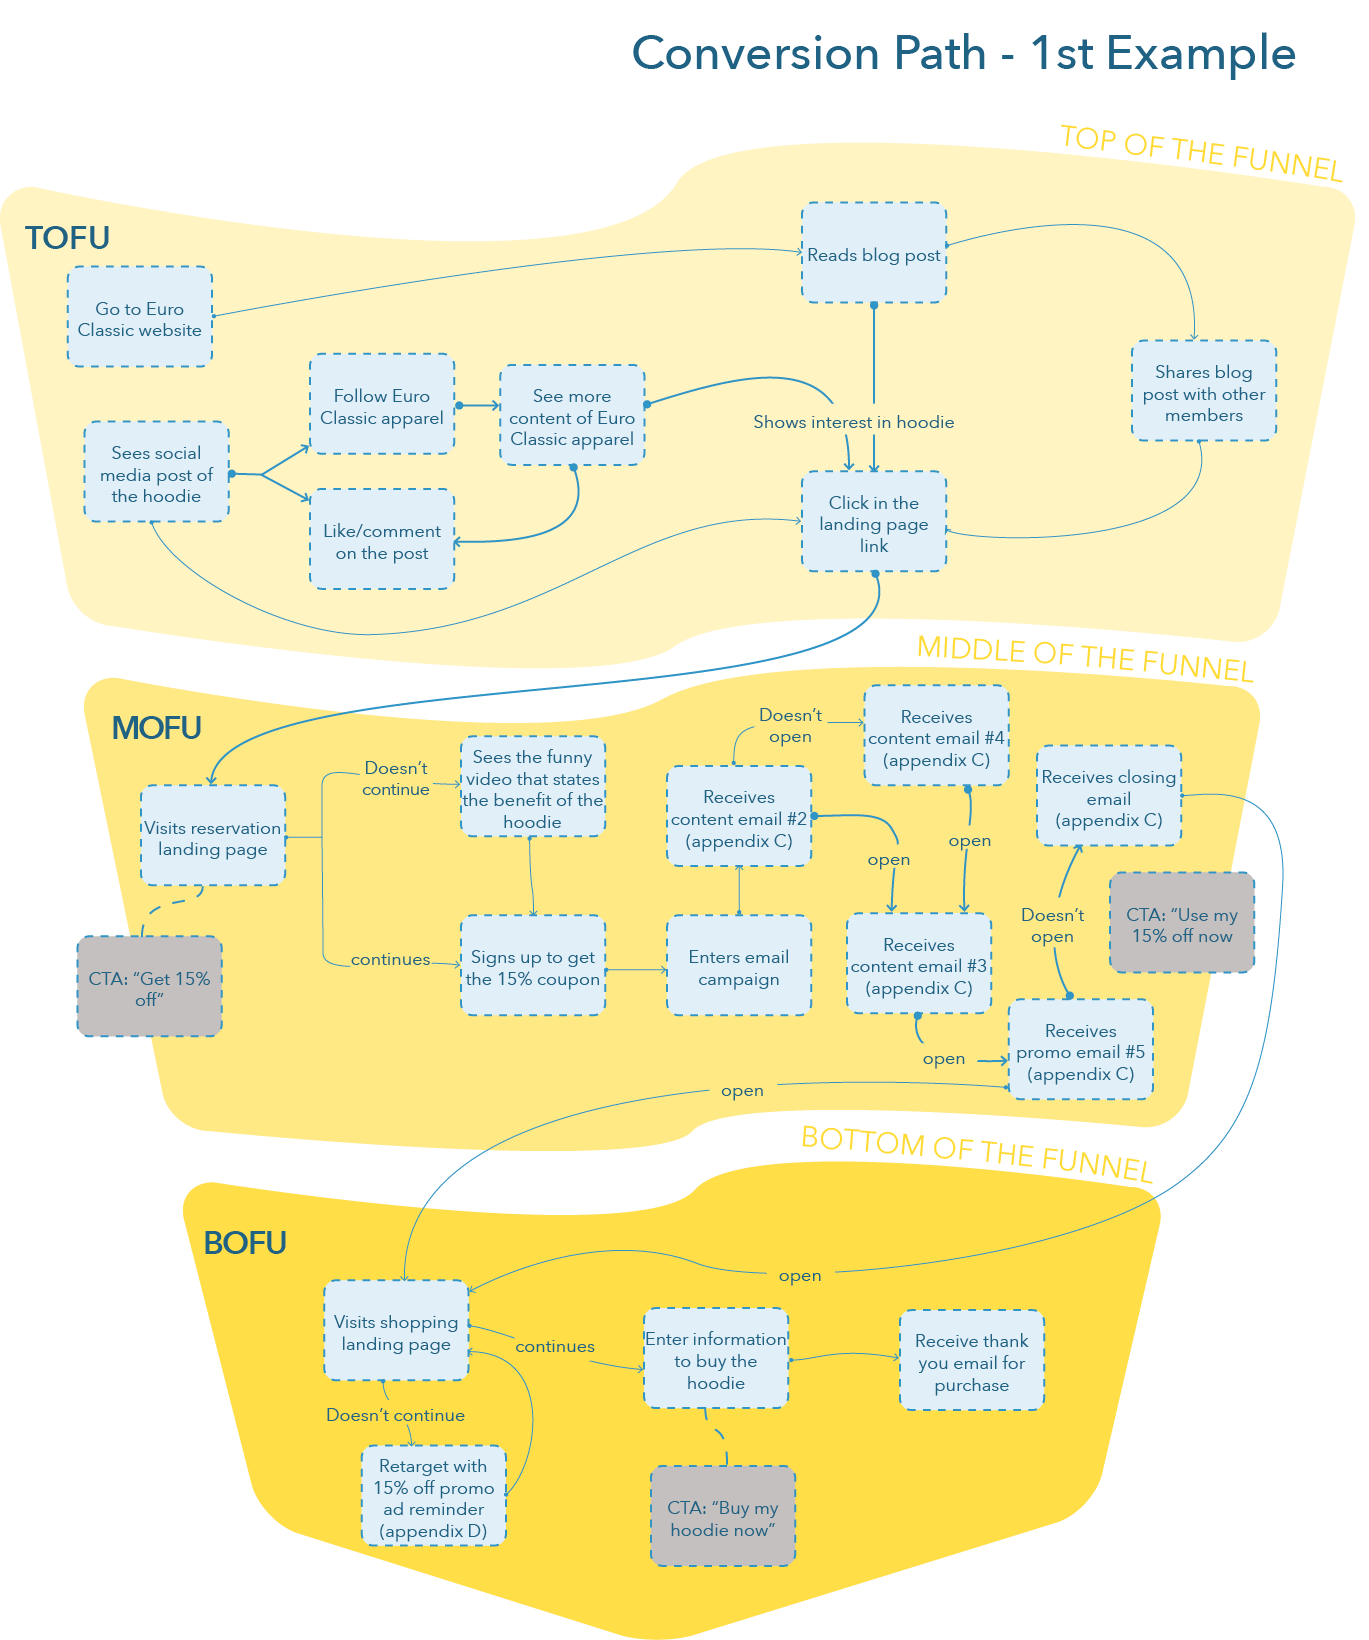 A flow chart representing a complex conversion path with many marketing activities.